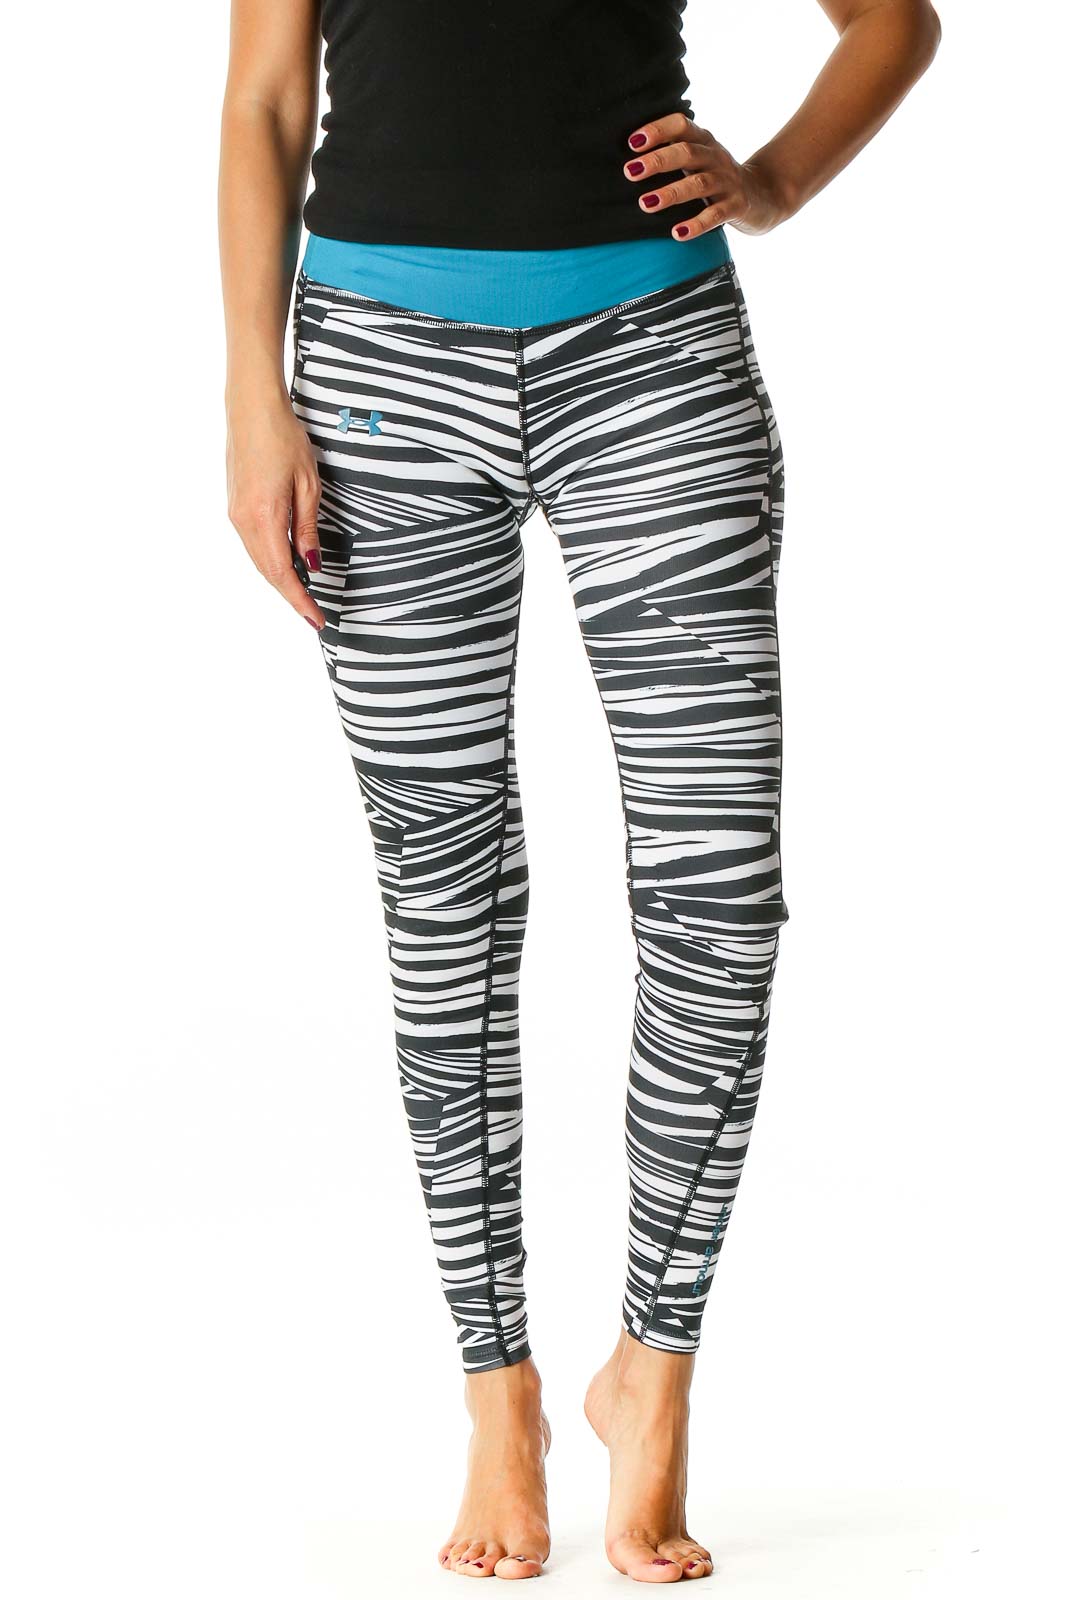 White Graphic Print Activewear Leggings Front